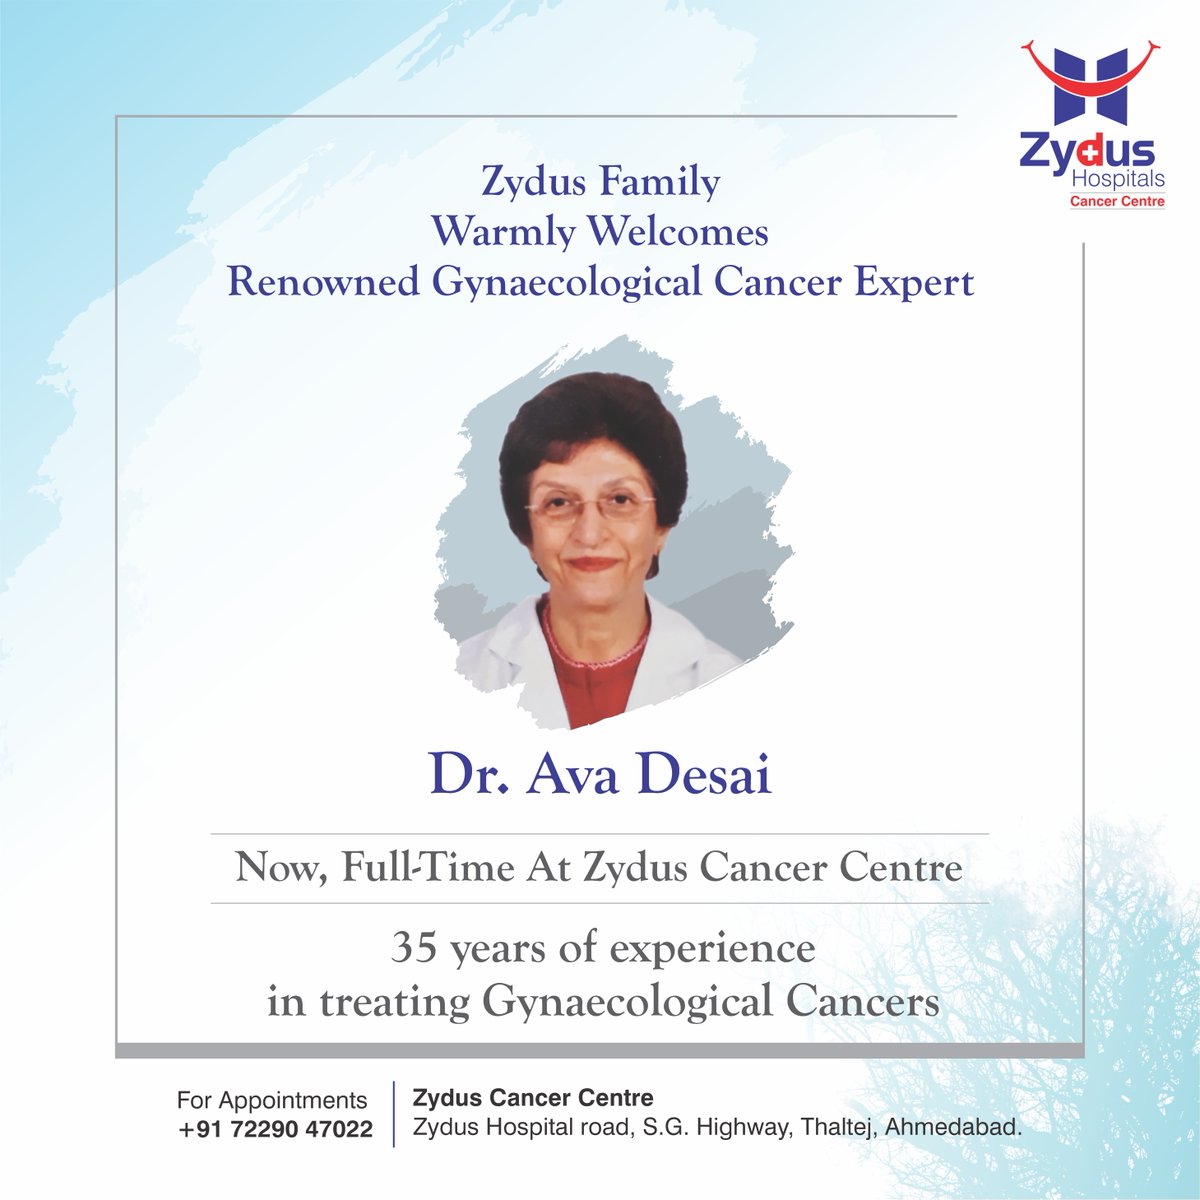 We are very pleased to welcome Gynaec-Onco Expert, Dr. Ava Desai to our Zydus Family. Dr. Ava brings with her decades of experience & a passion for medical sciences. We are surely looking forward to learn a lot from her.
#ZydusCancerCentre #GynaecologicalCancers #BestCancerCentre https://t.co/eDdjvPUhDb